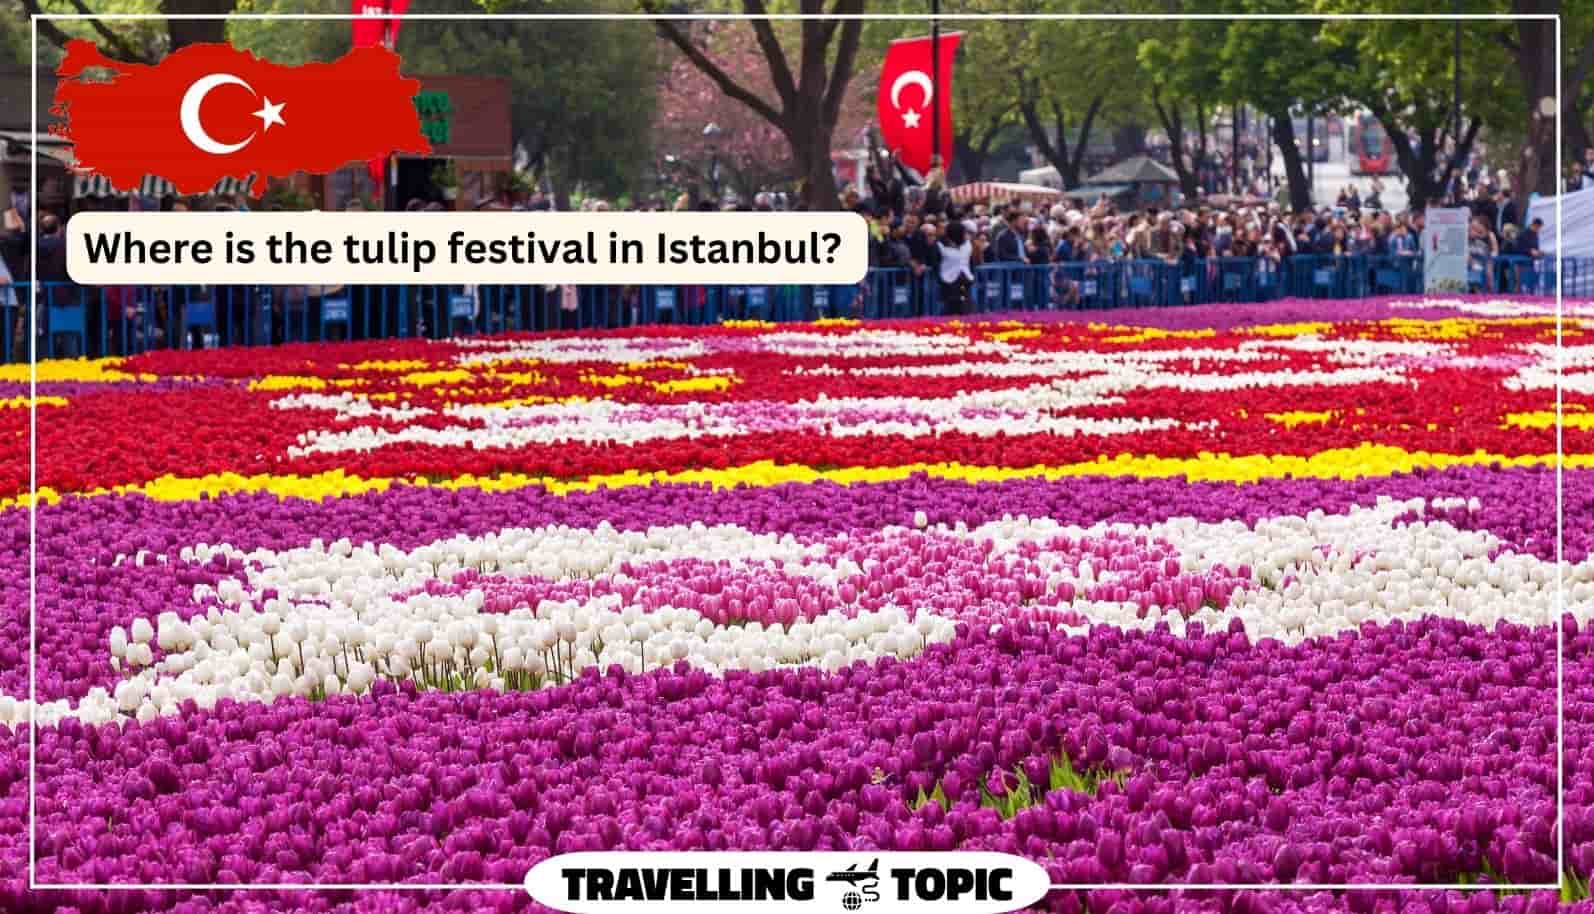 Where is the tulip festival in Istanbul